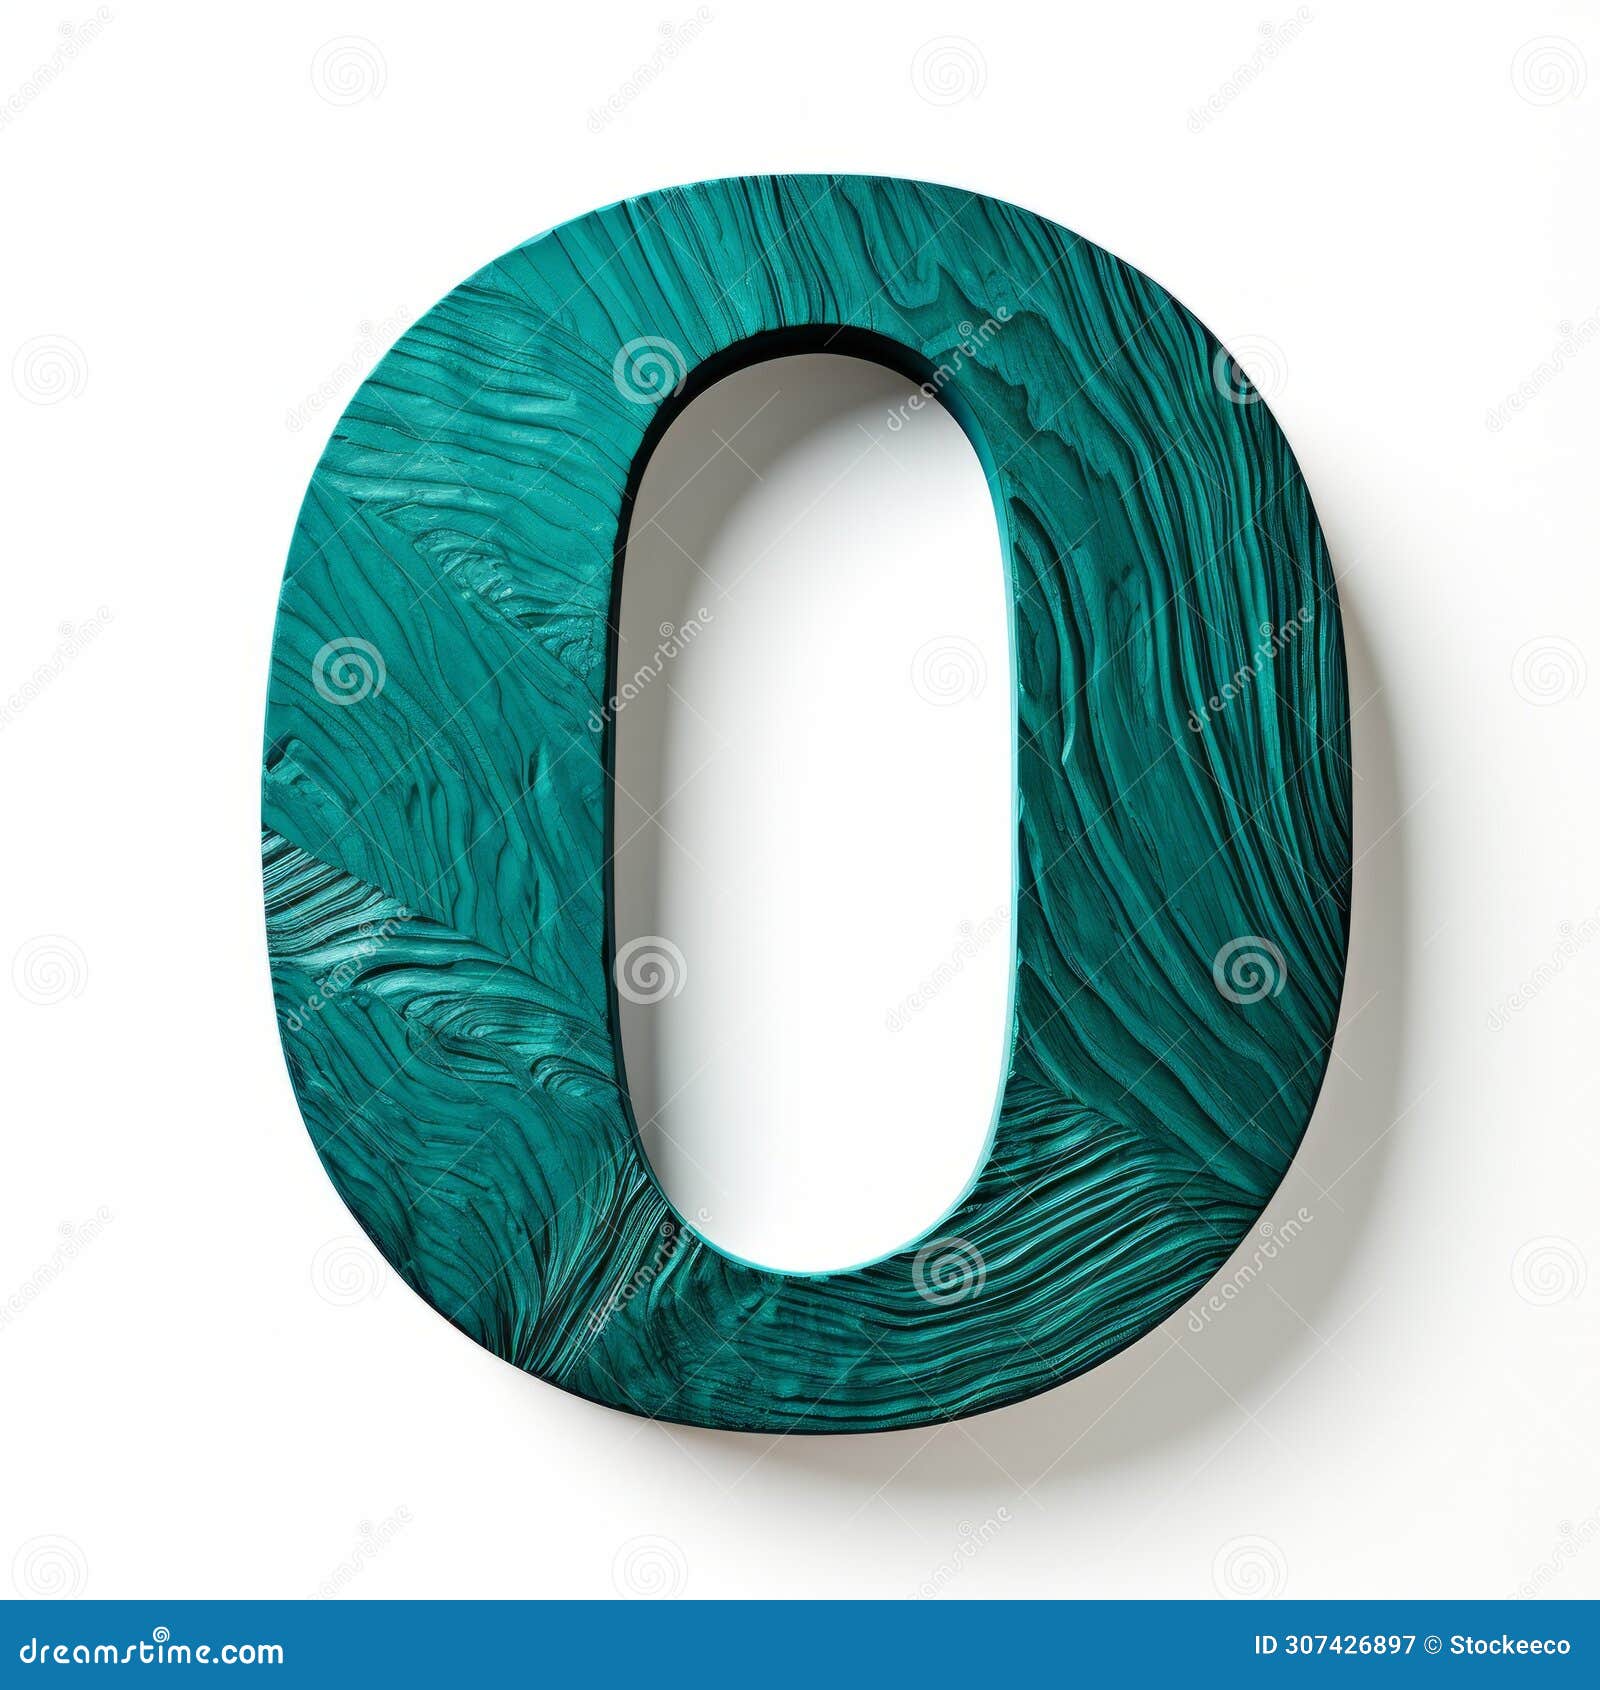 turquoise wooden letter o: texture-rich surface inspired by nobuo sekine and justin gaffrey